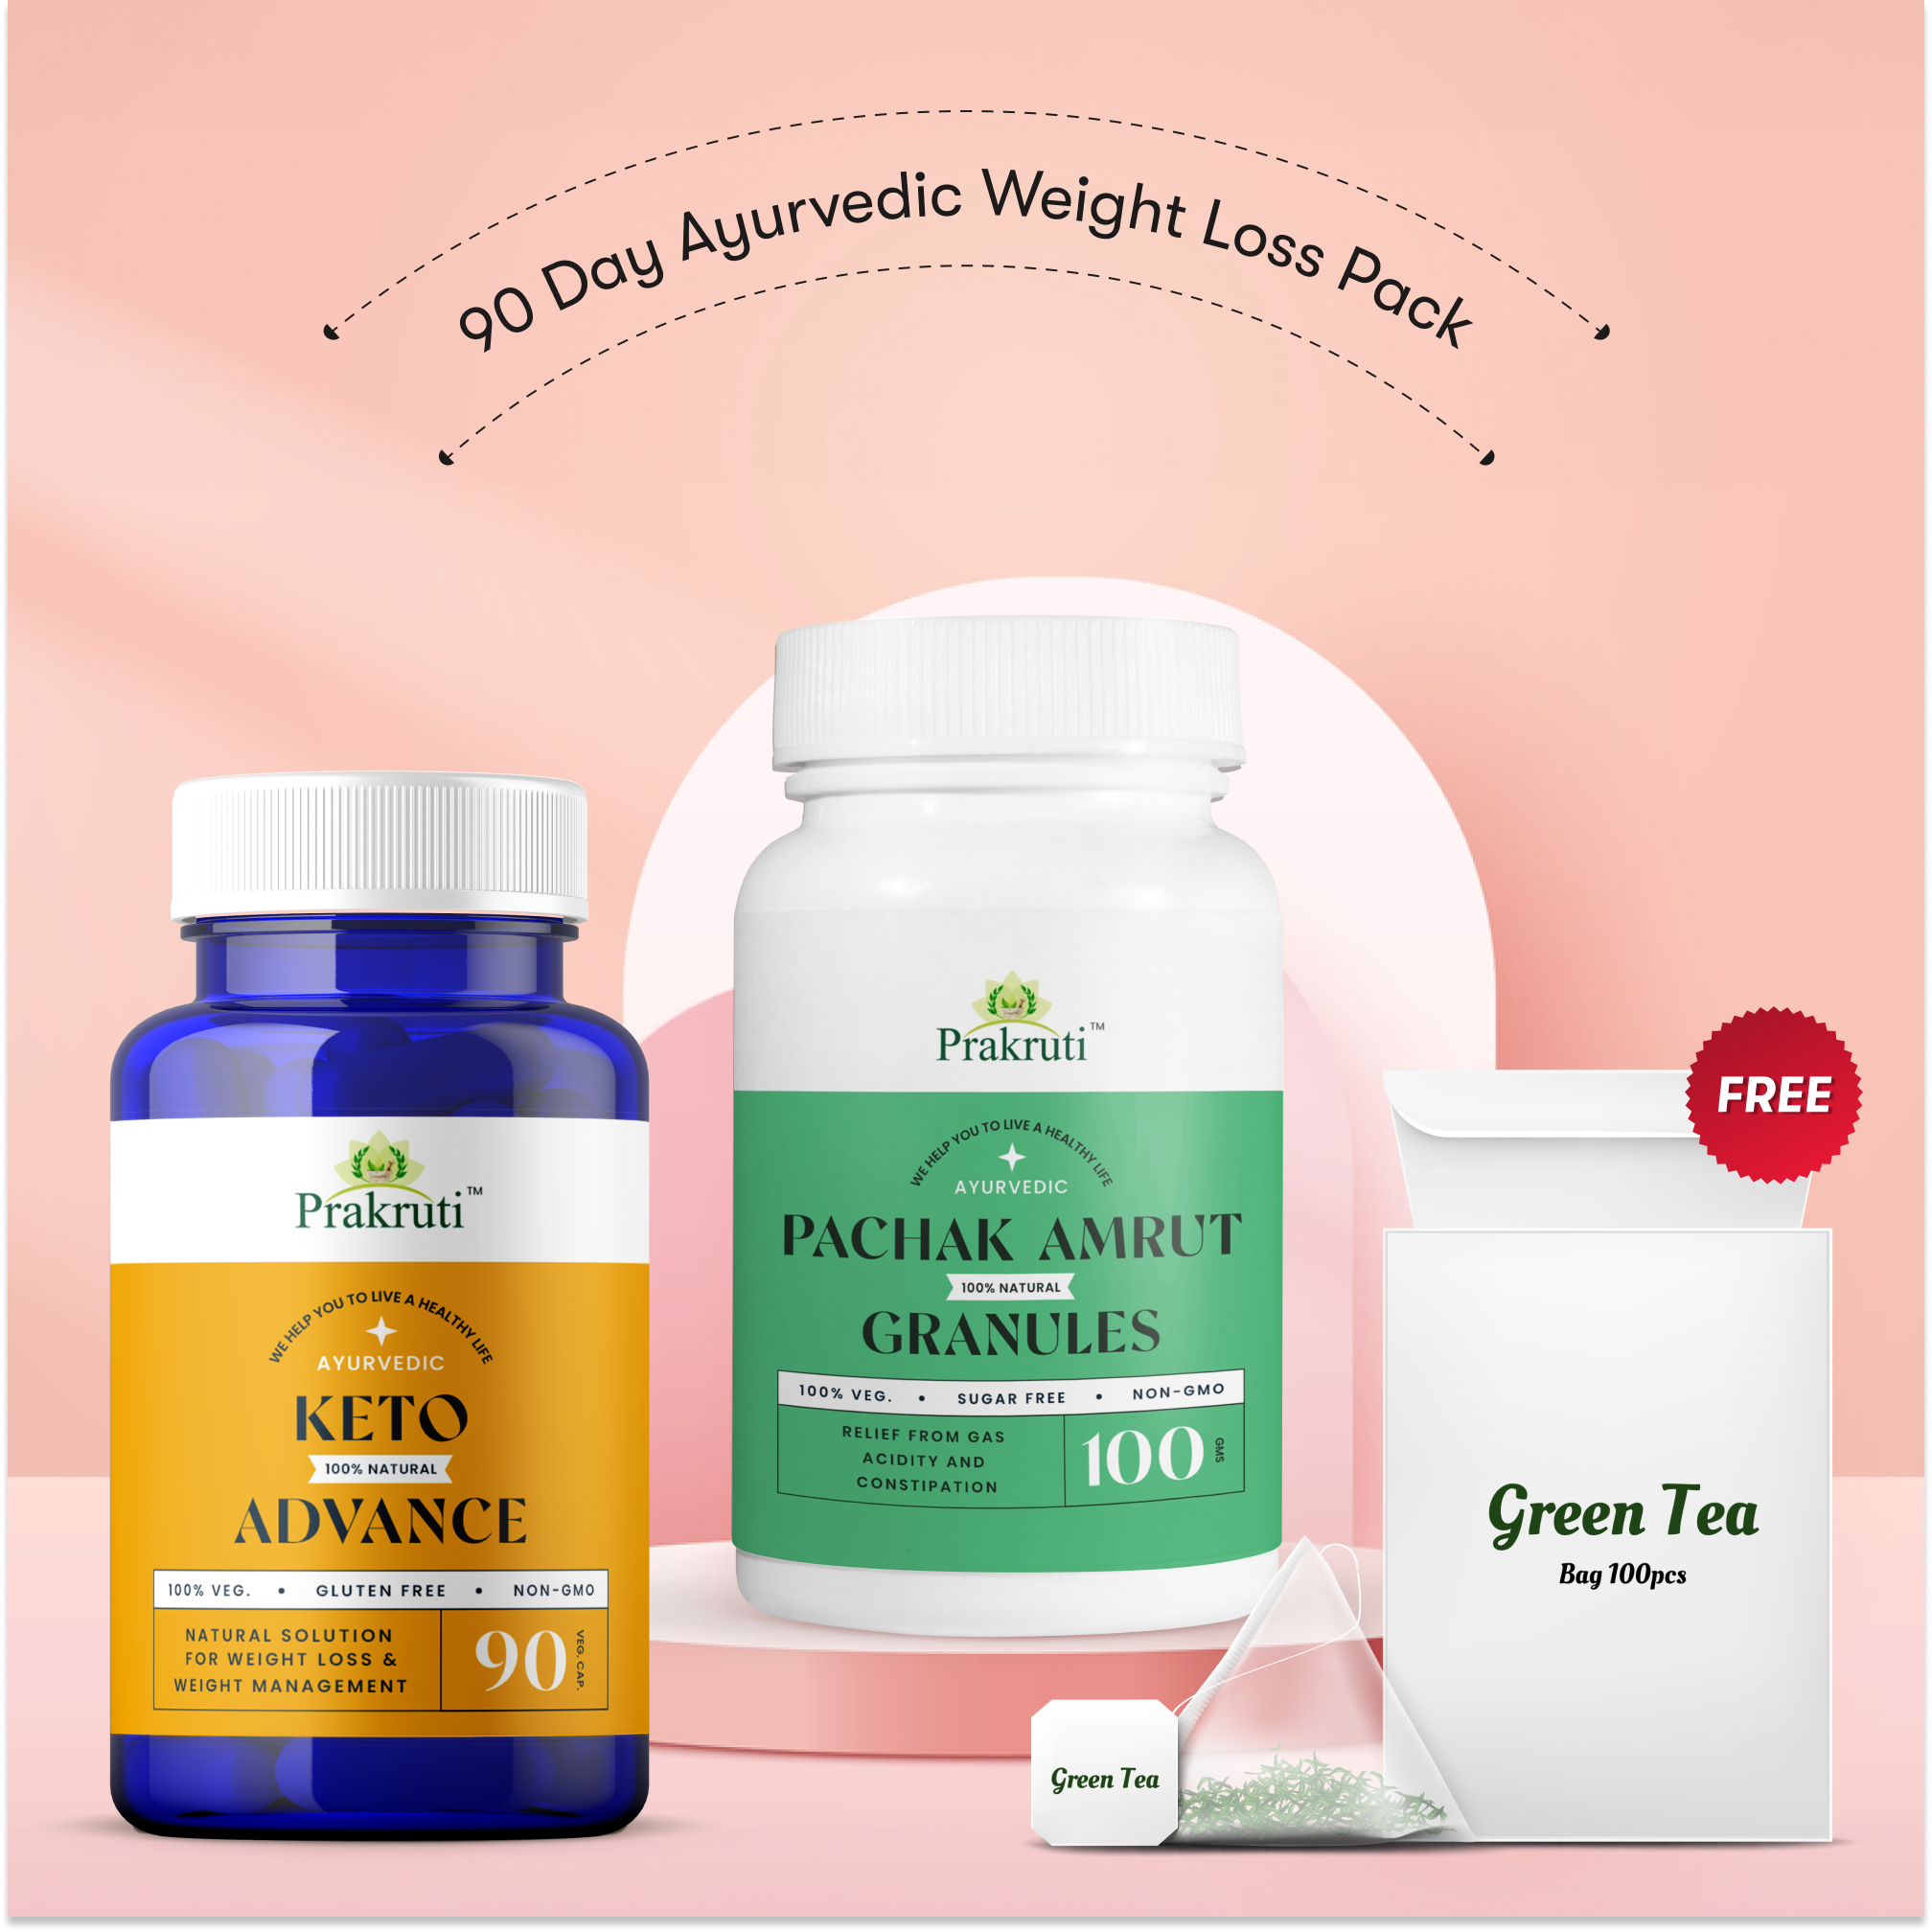 Effective Weight Loss, Fat Burn & Body Detox Products